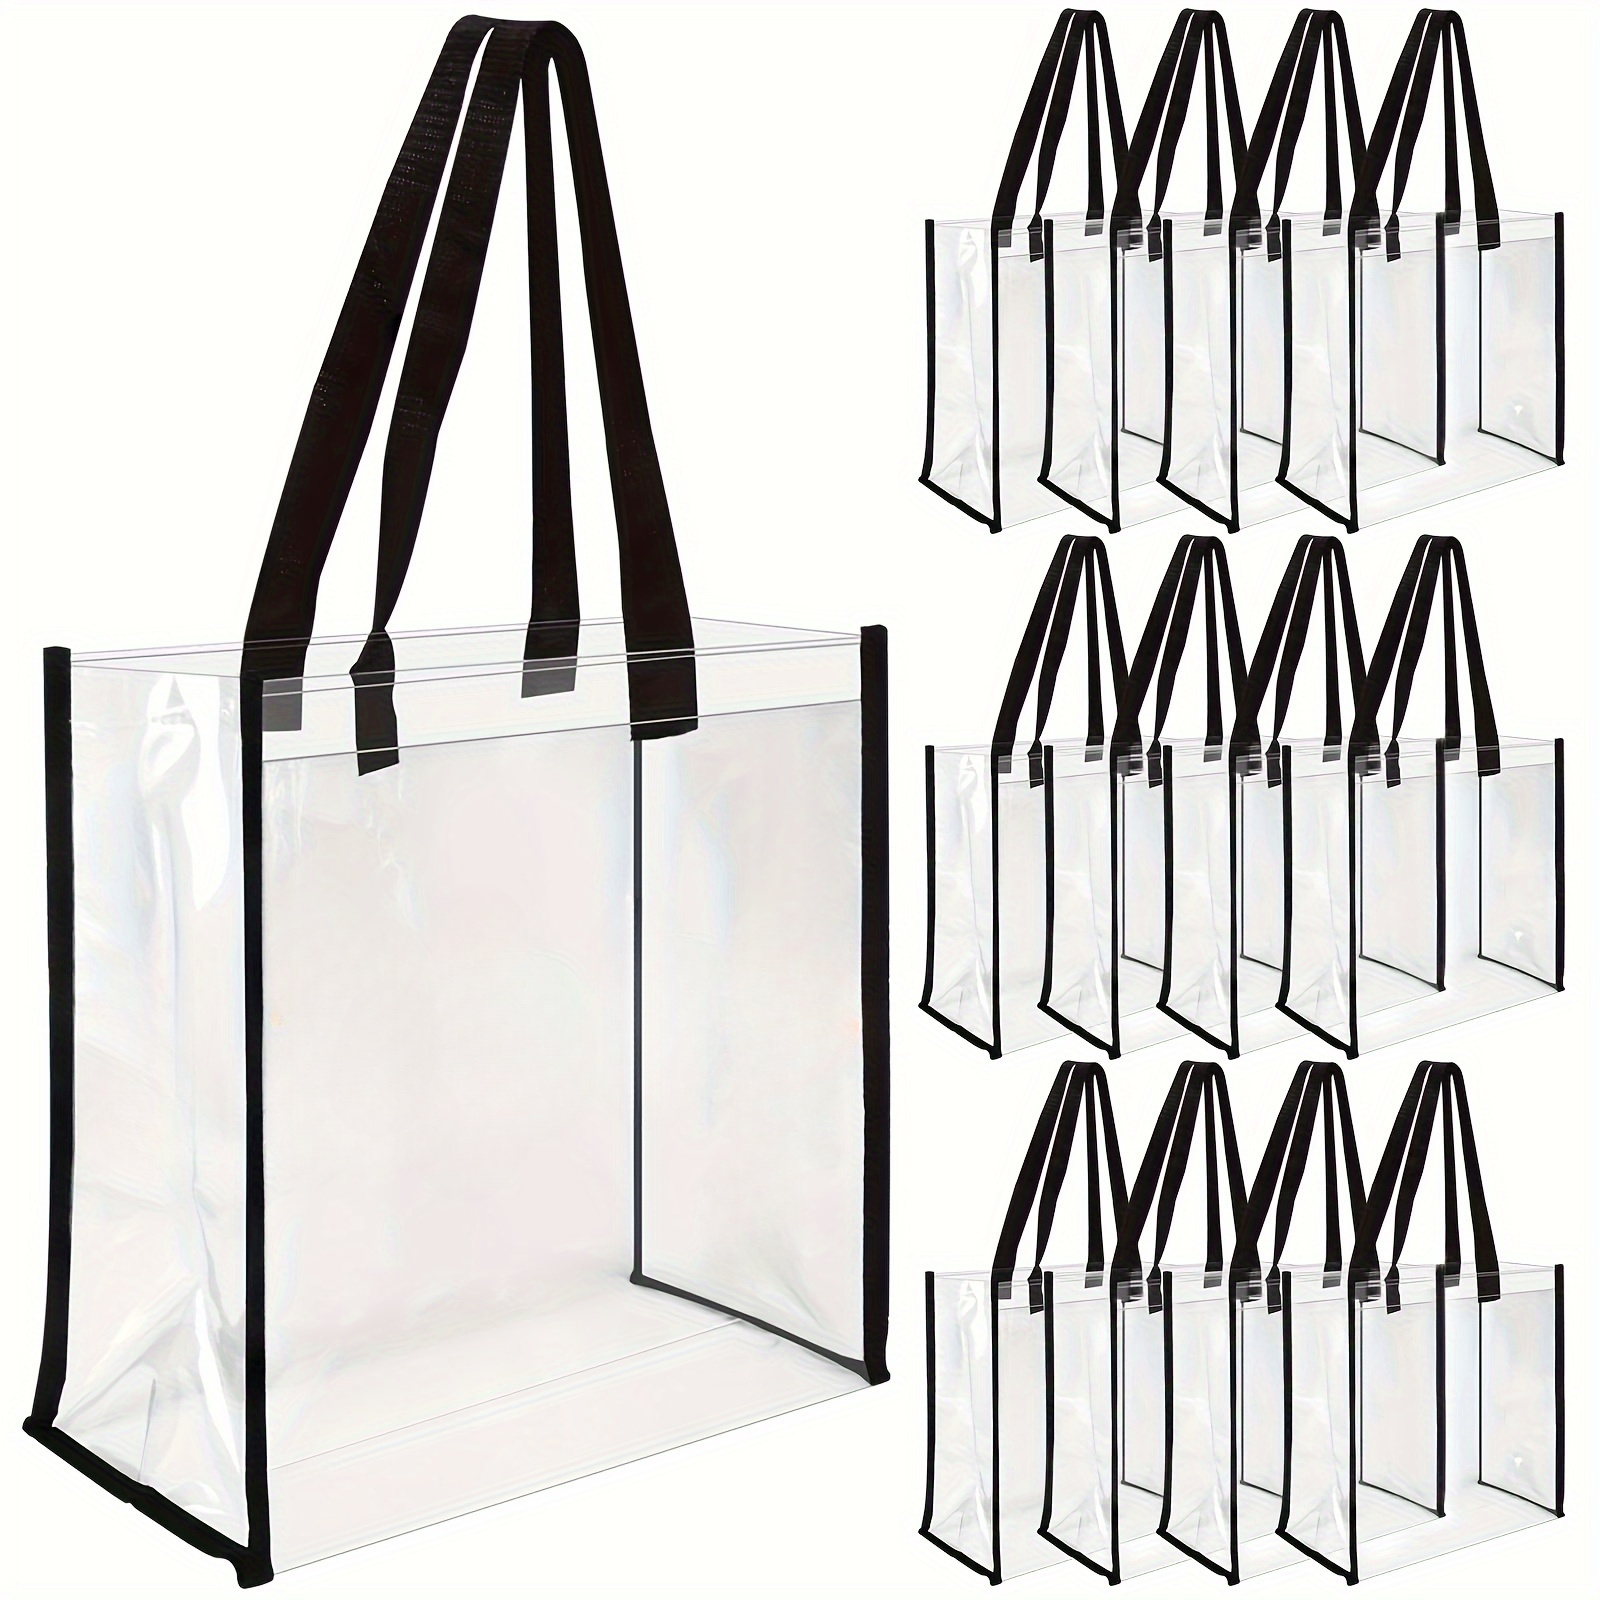 

1/2/4pcs Large Clear Gift Tote Bag For Store Clear Plastic Tote Bags With Handles Clear Stadium Bag Clear Beach Bag Purse Transparent Bag See Through Tote Bag For Work Sports Concert 12 X 12 X 6 Inch